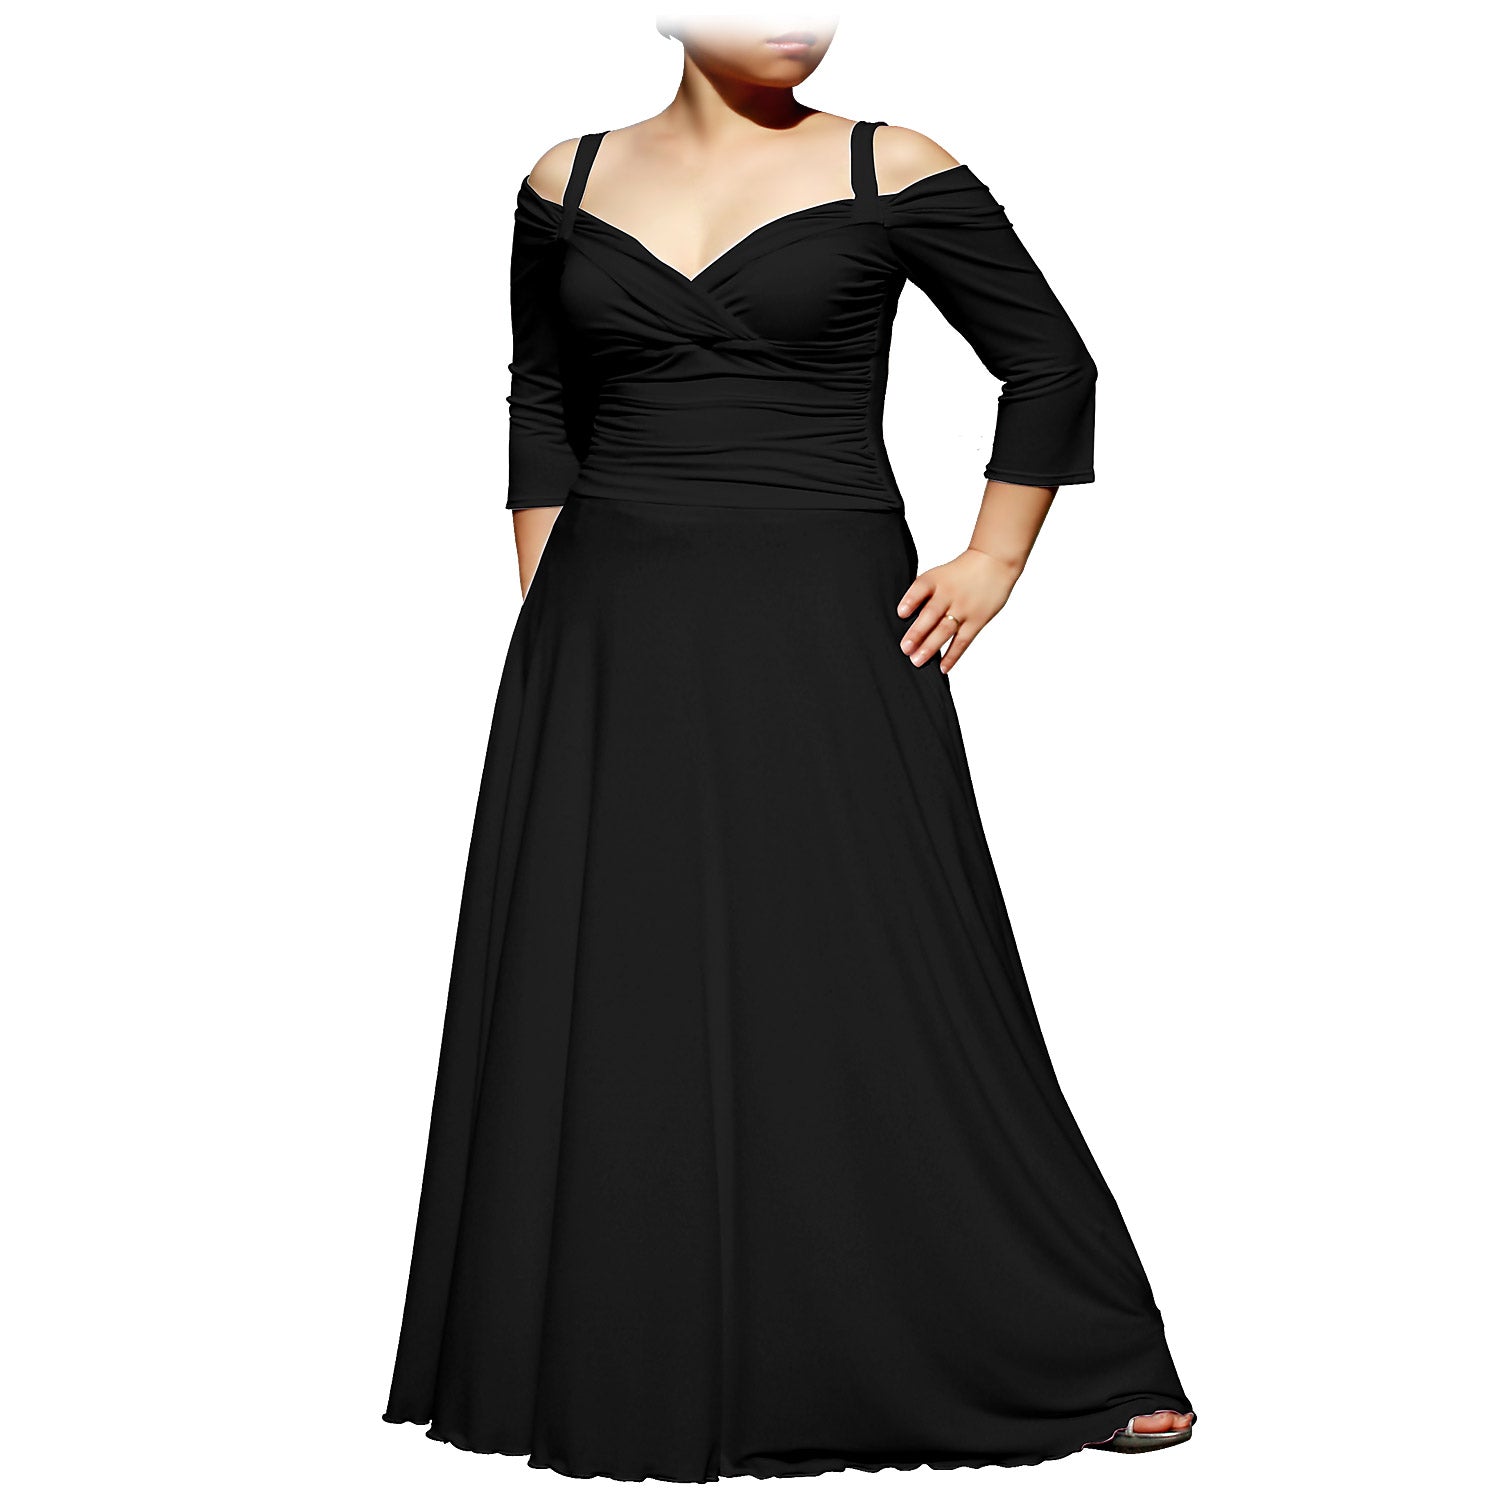 Evanese Women's Plus Size Elegant Long Formal Evening Dress with 3/4 Sleeves